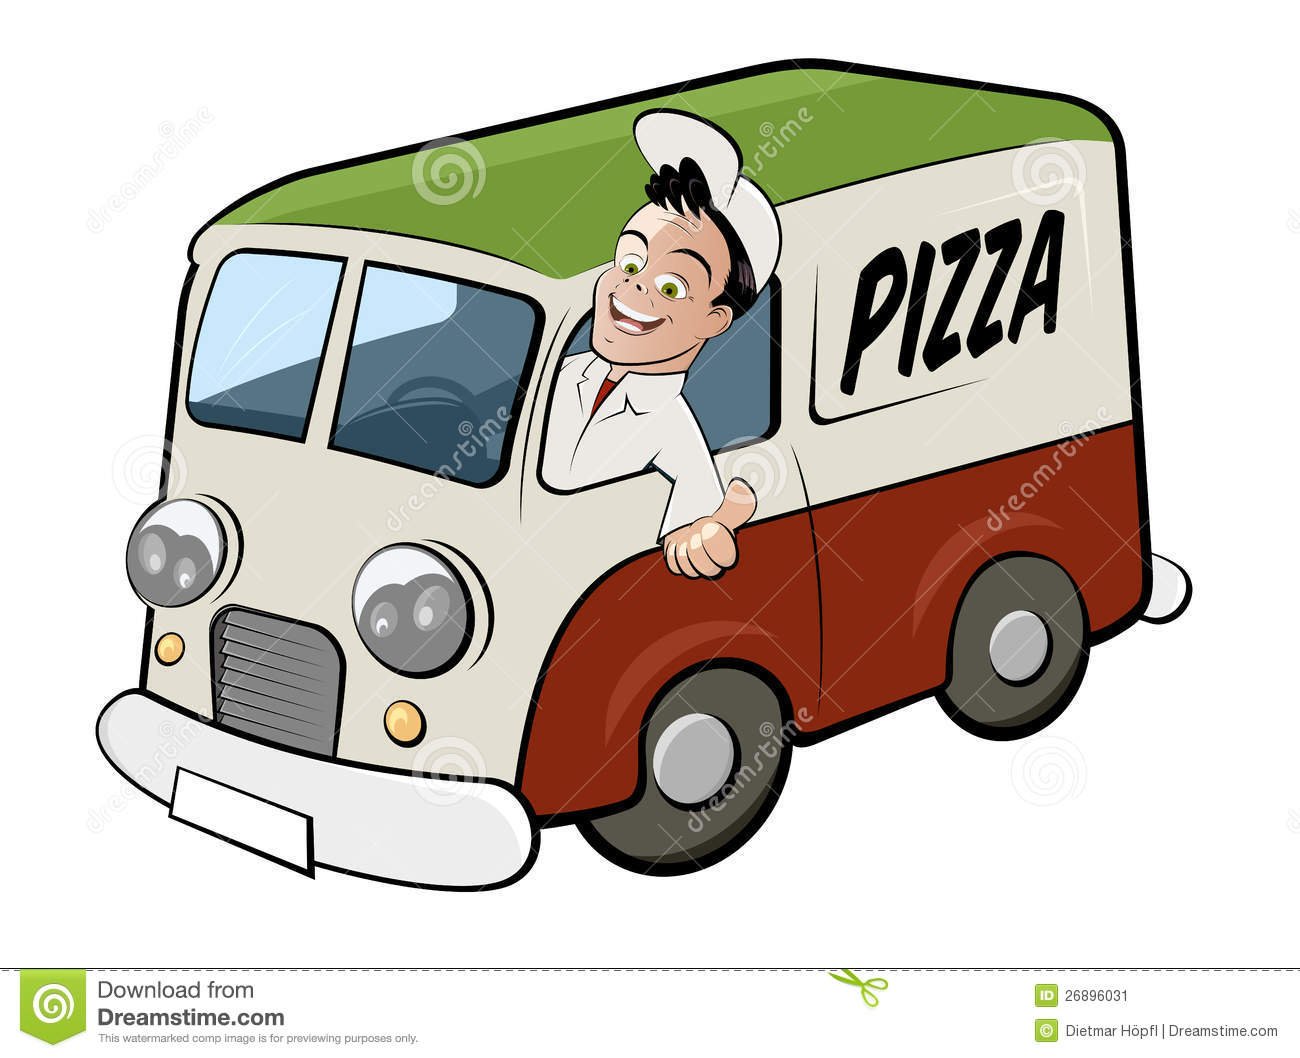 Cartoon Illustration Of Pizza Delivery Driver In Van With Colors Of